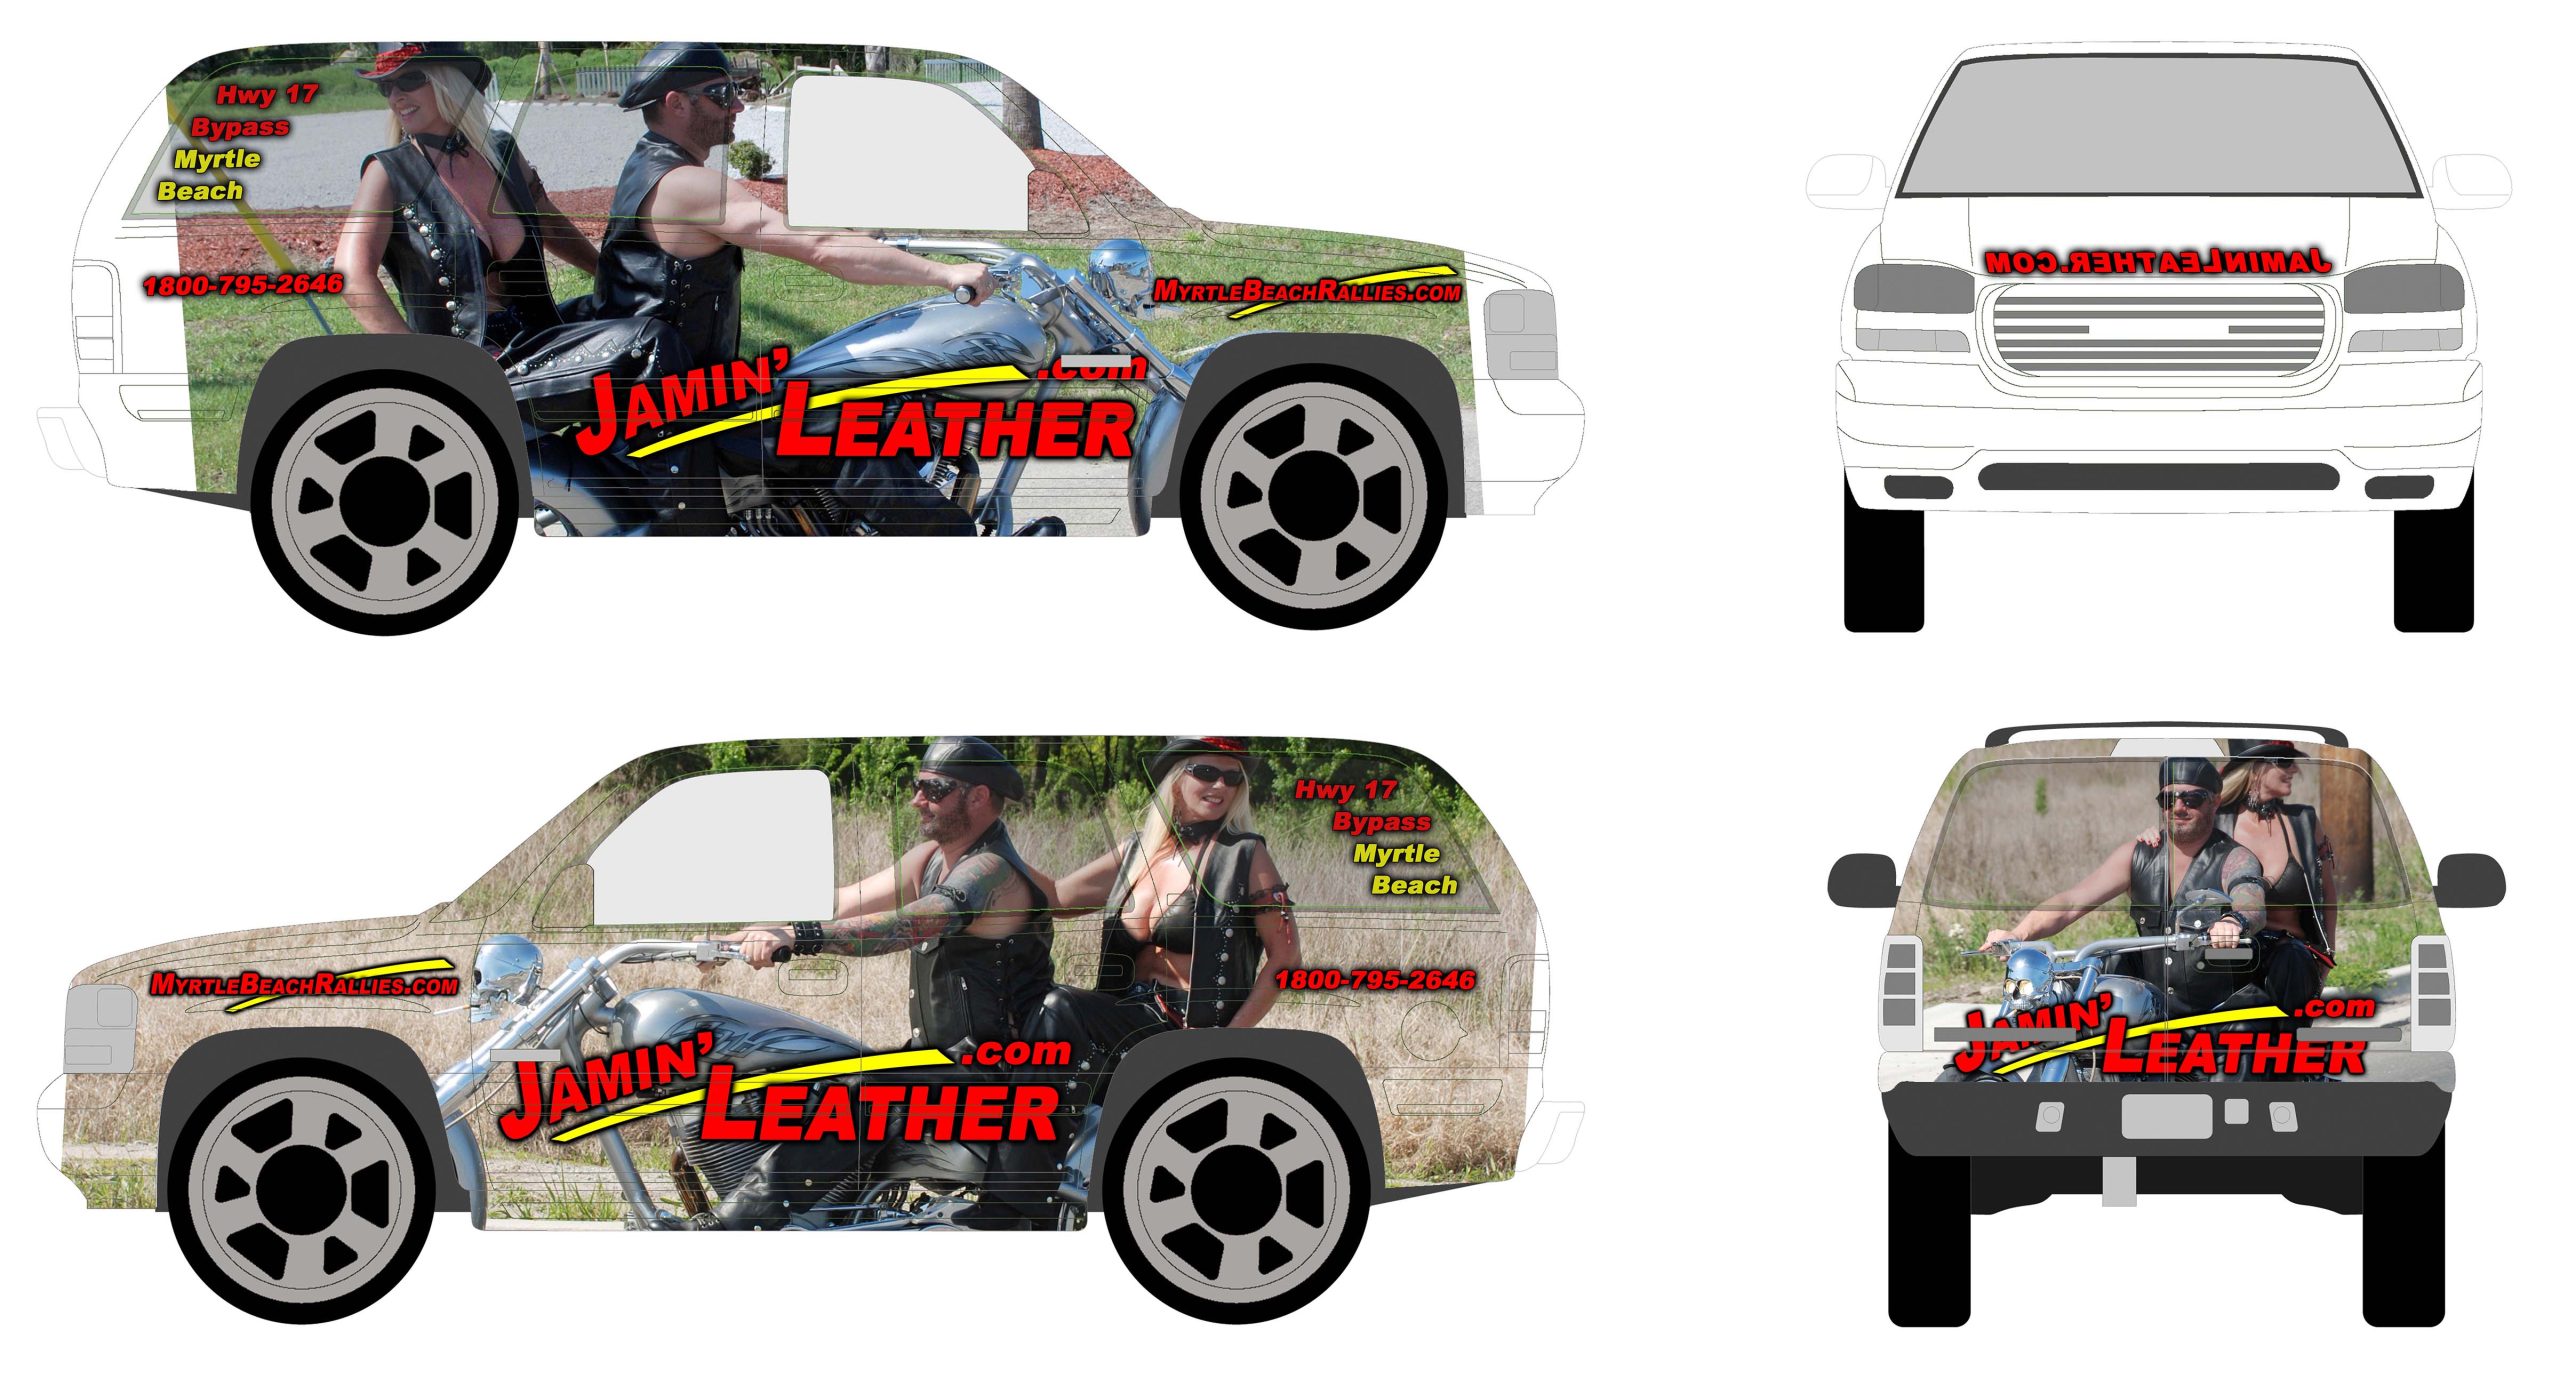 JAMIN LEATHER TRUCK GRAPHIC 2014